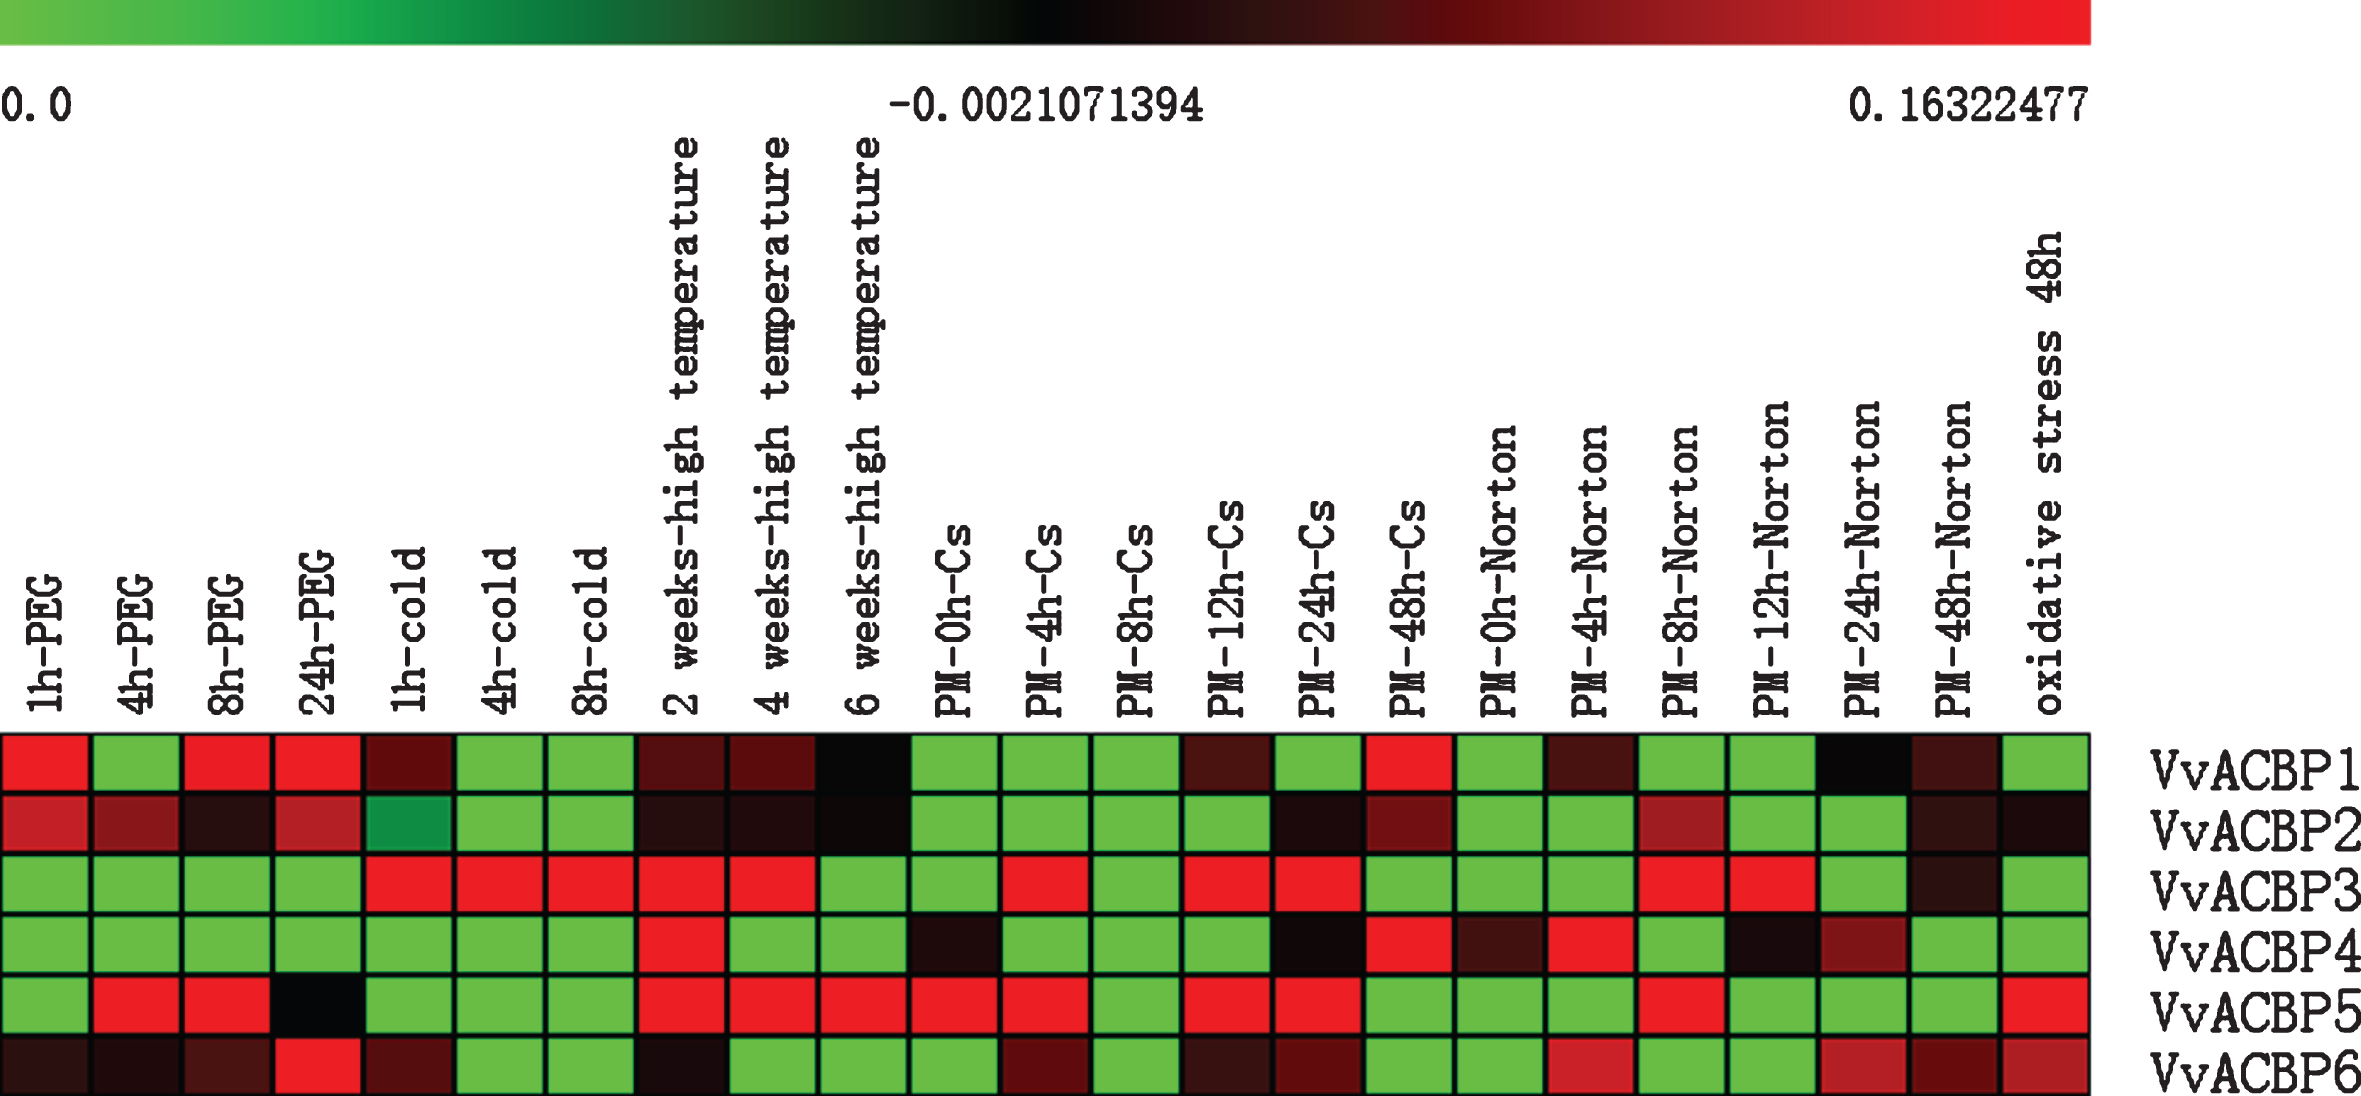 Expression profiles of VvACBP genes identified in PLEXdb. The intensity of expression is represented in the colored bar at the top of the chart. Expressed under conditions listed in the middle. The scale bars represent values from 0 to 0.23060082.